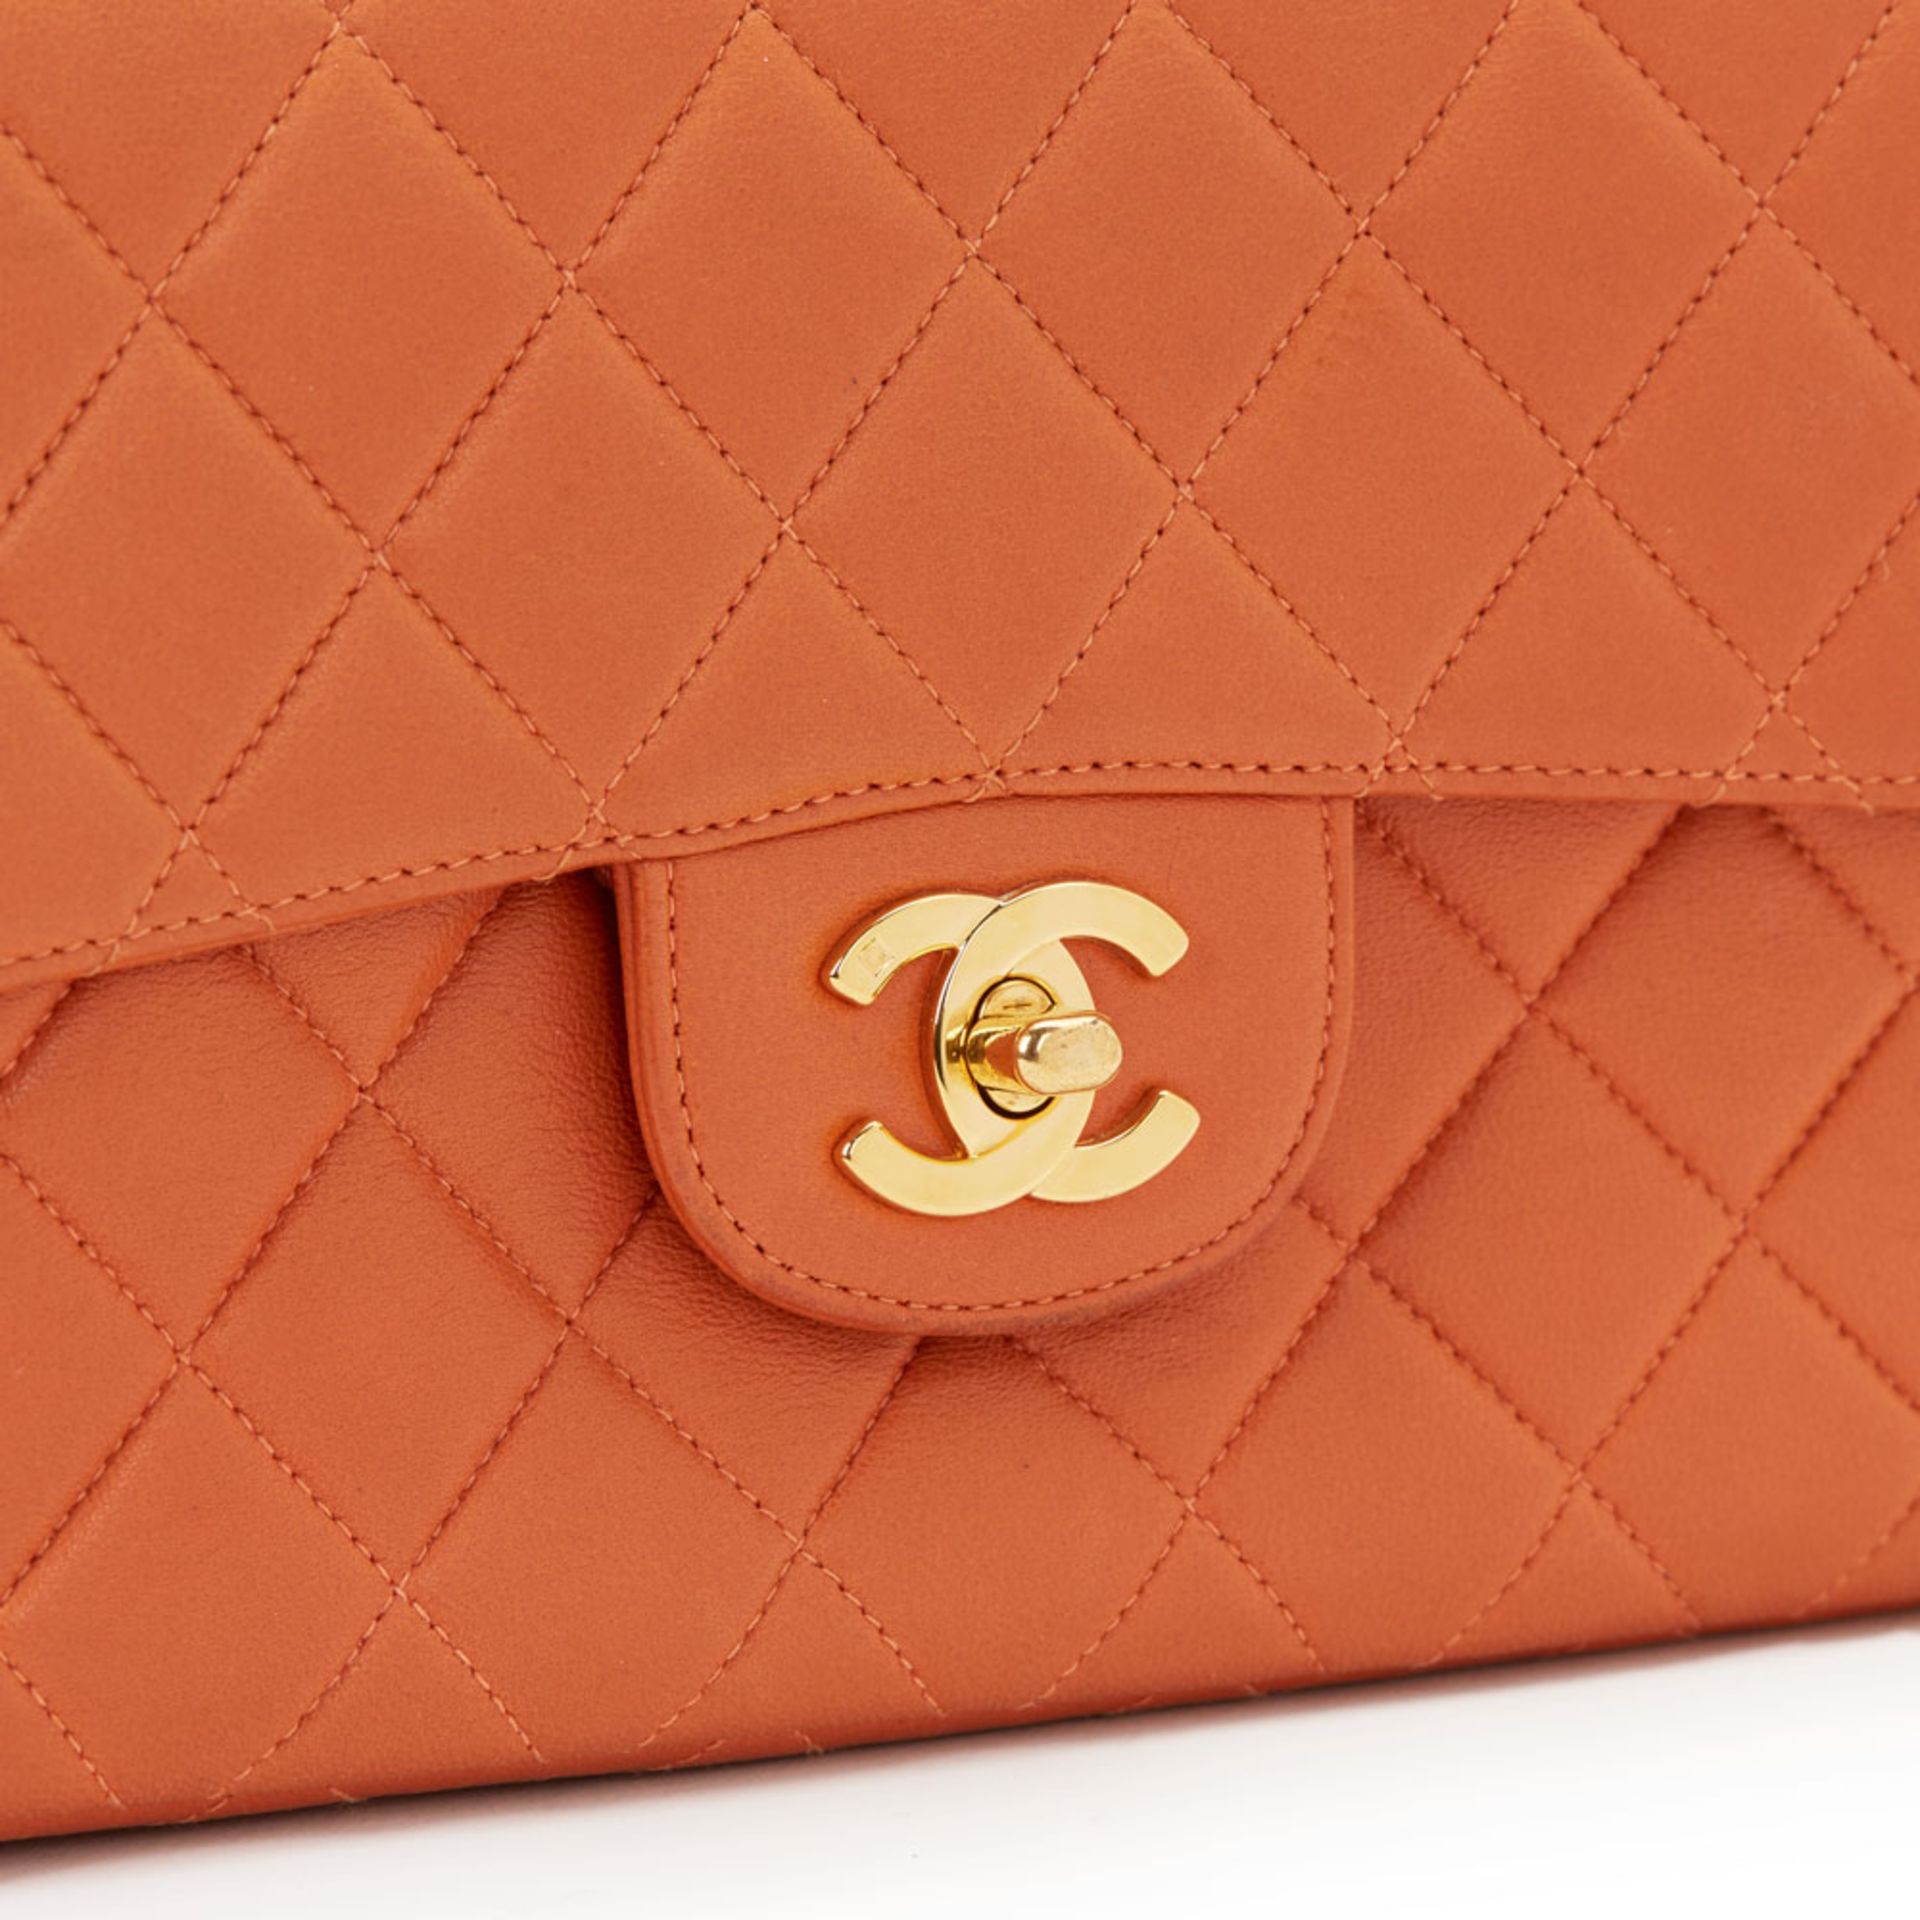 Chanel Double Sided Small Classic Flap Bag - Image 7 of 10